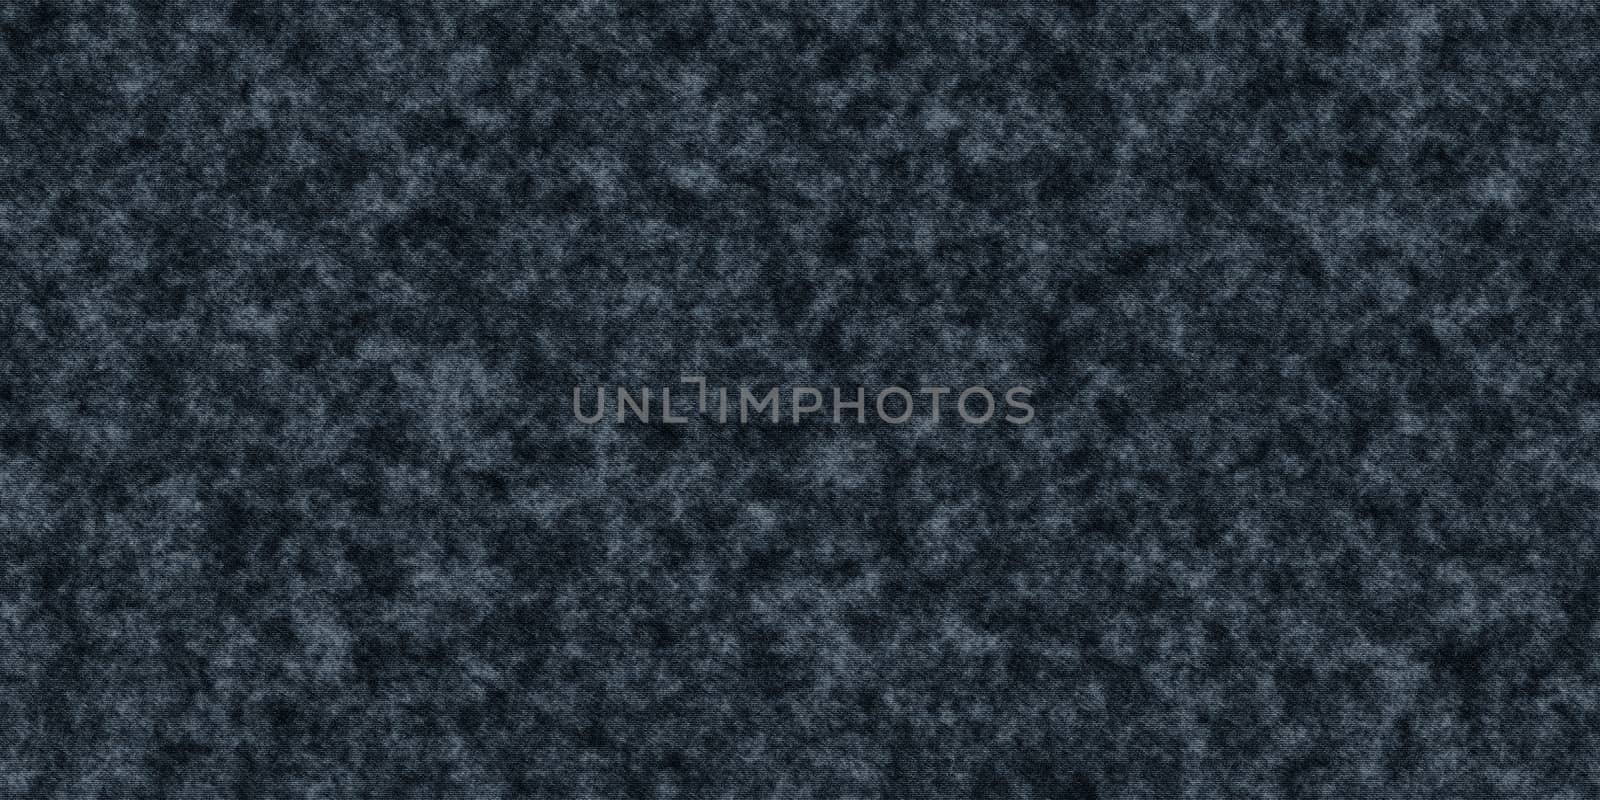 Dirty Blue Jeans Denim Seamless Textures. Textile Fabric Background. Jeans Clothing Material Surface. Grunge Wear Pattern.